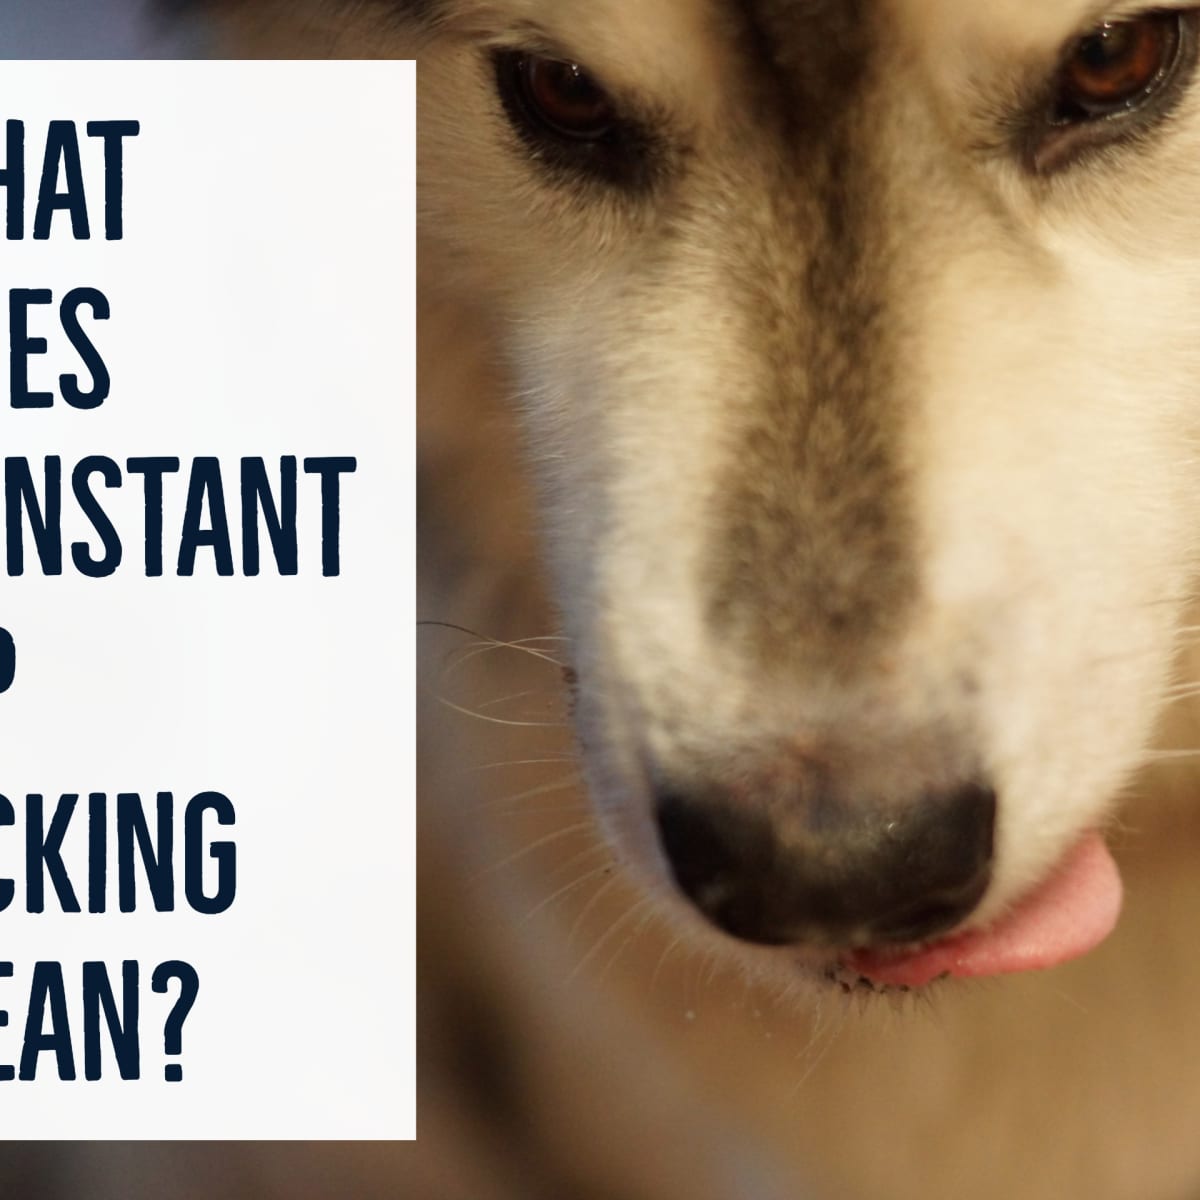 Why does my dog keep licking me?